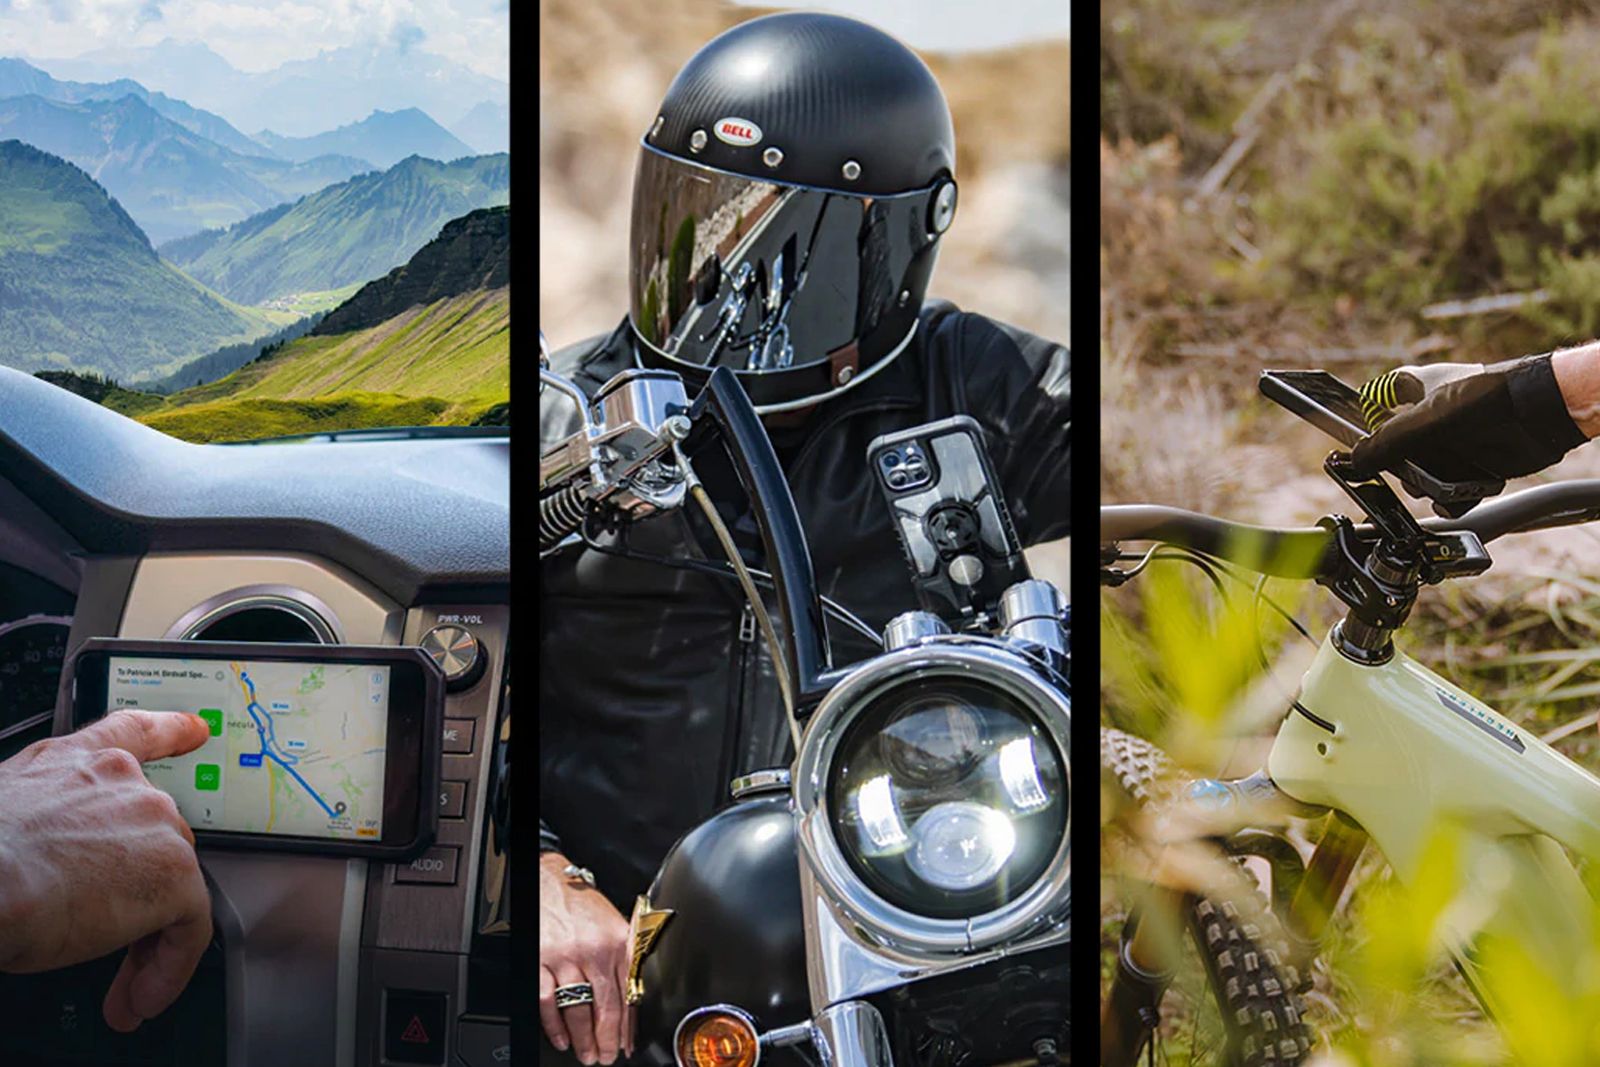 Keep your smartphones safe while riding motorcycles with Rokform’s rugged mounts and cases photo 1